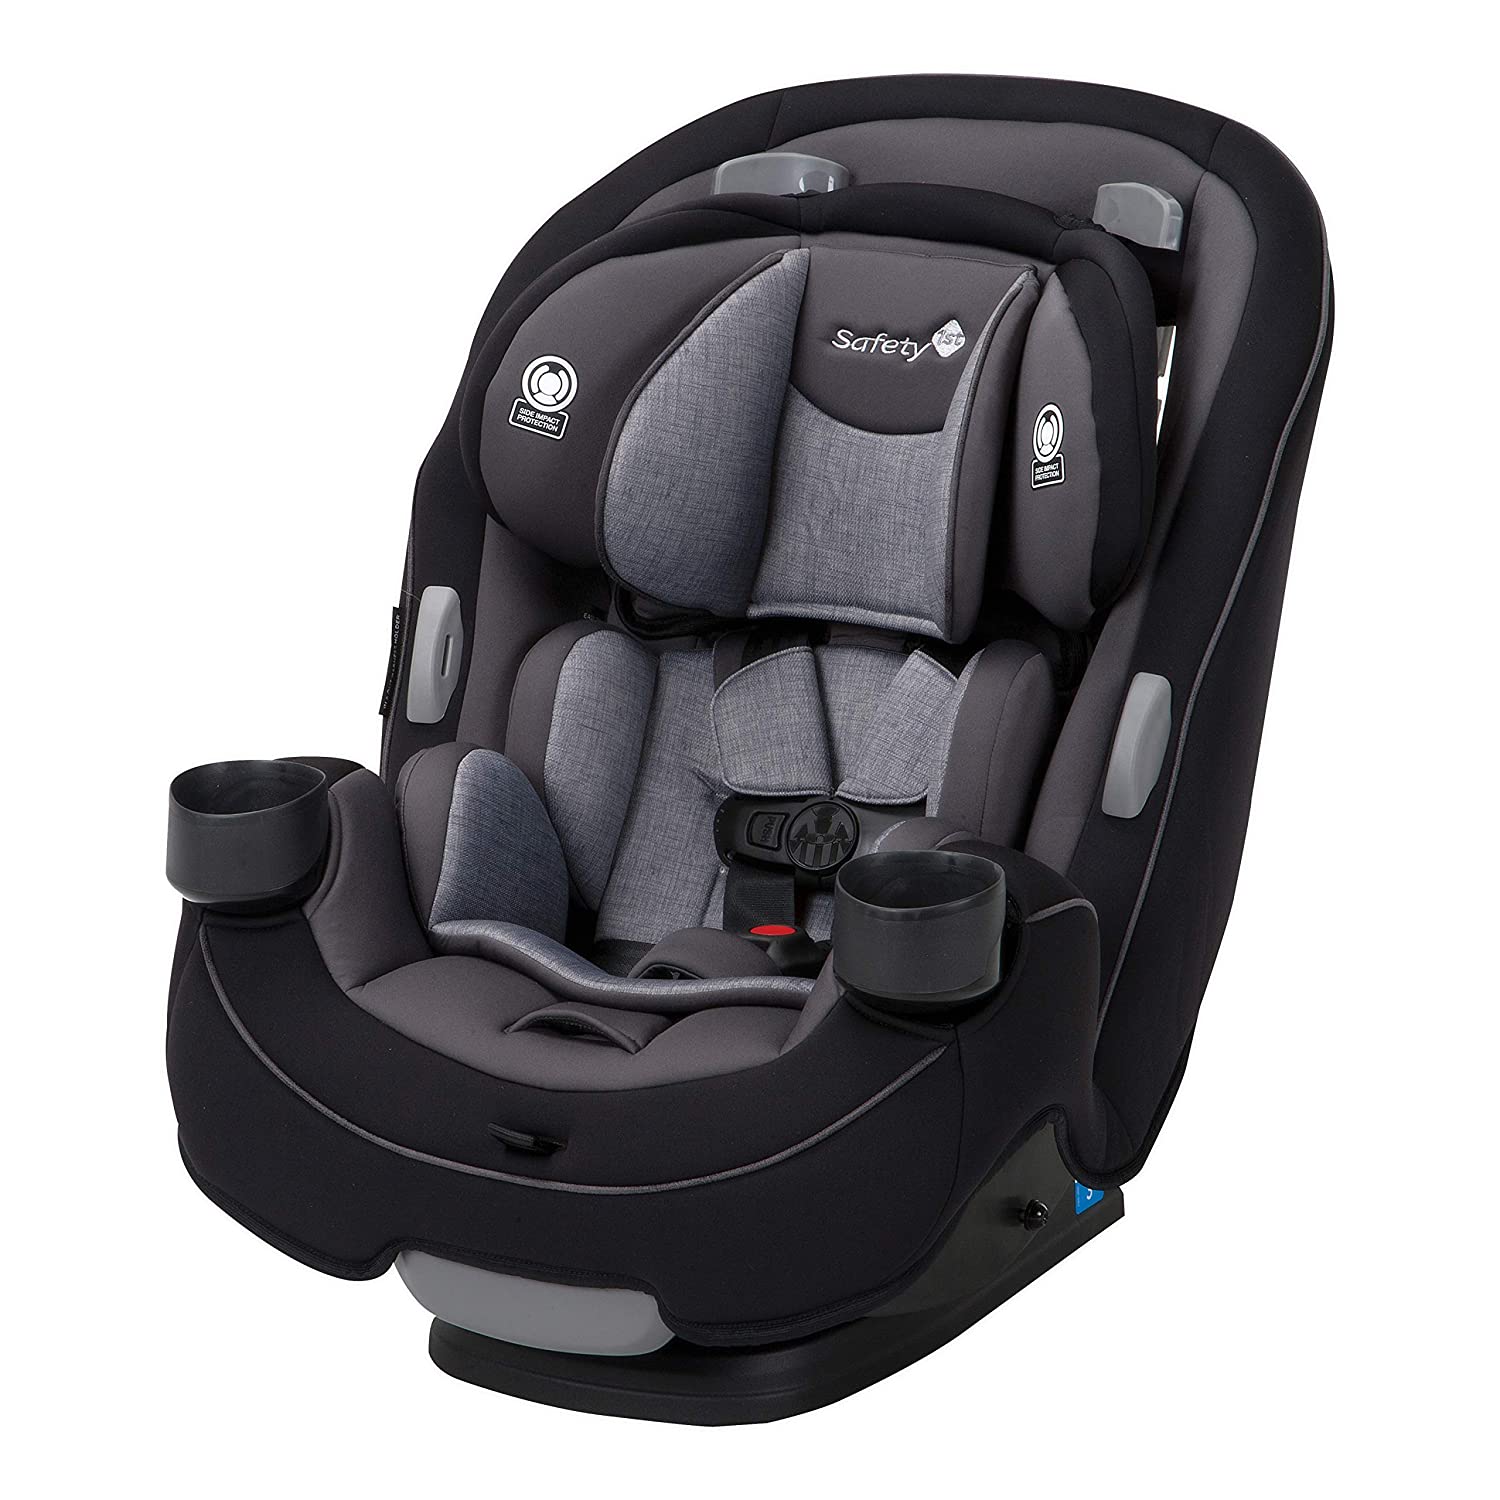 Top 5 Best Affordable Convertible Car Seats Reviews in 2023 3